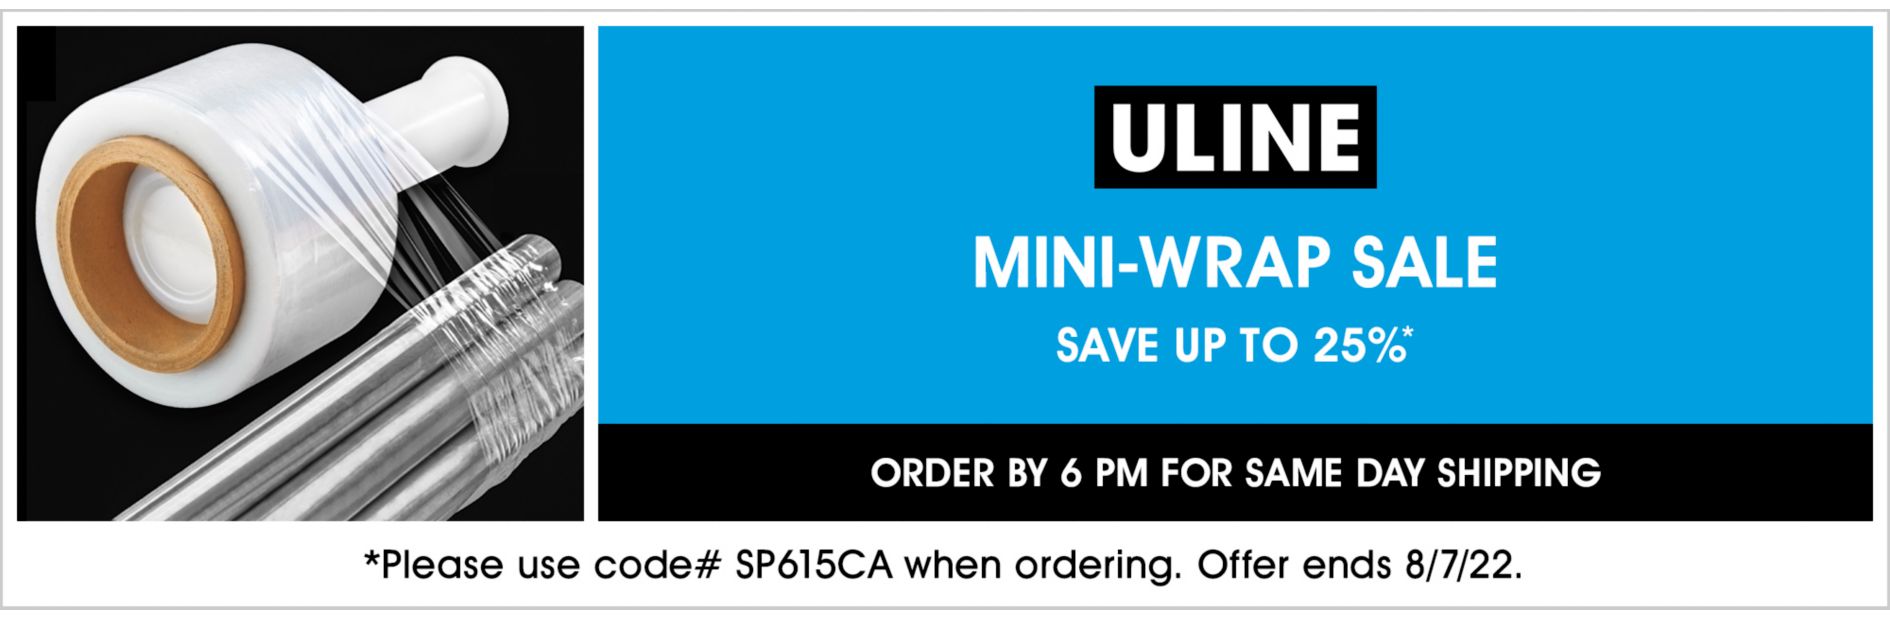 SP615CA Stretch Mini-Wrap Sale, Save up to 25%, Use code SP615CA, Offer ends 8/07/22